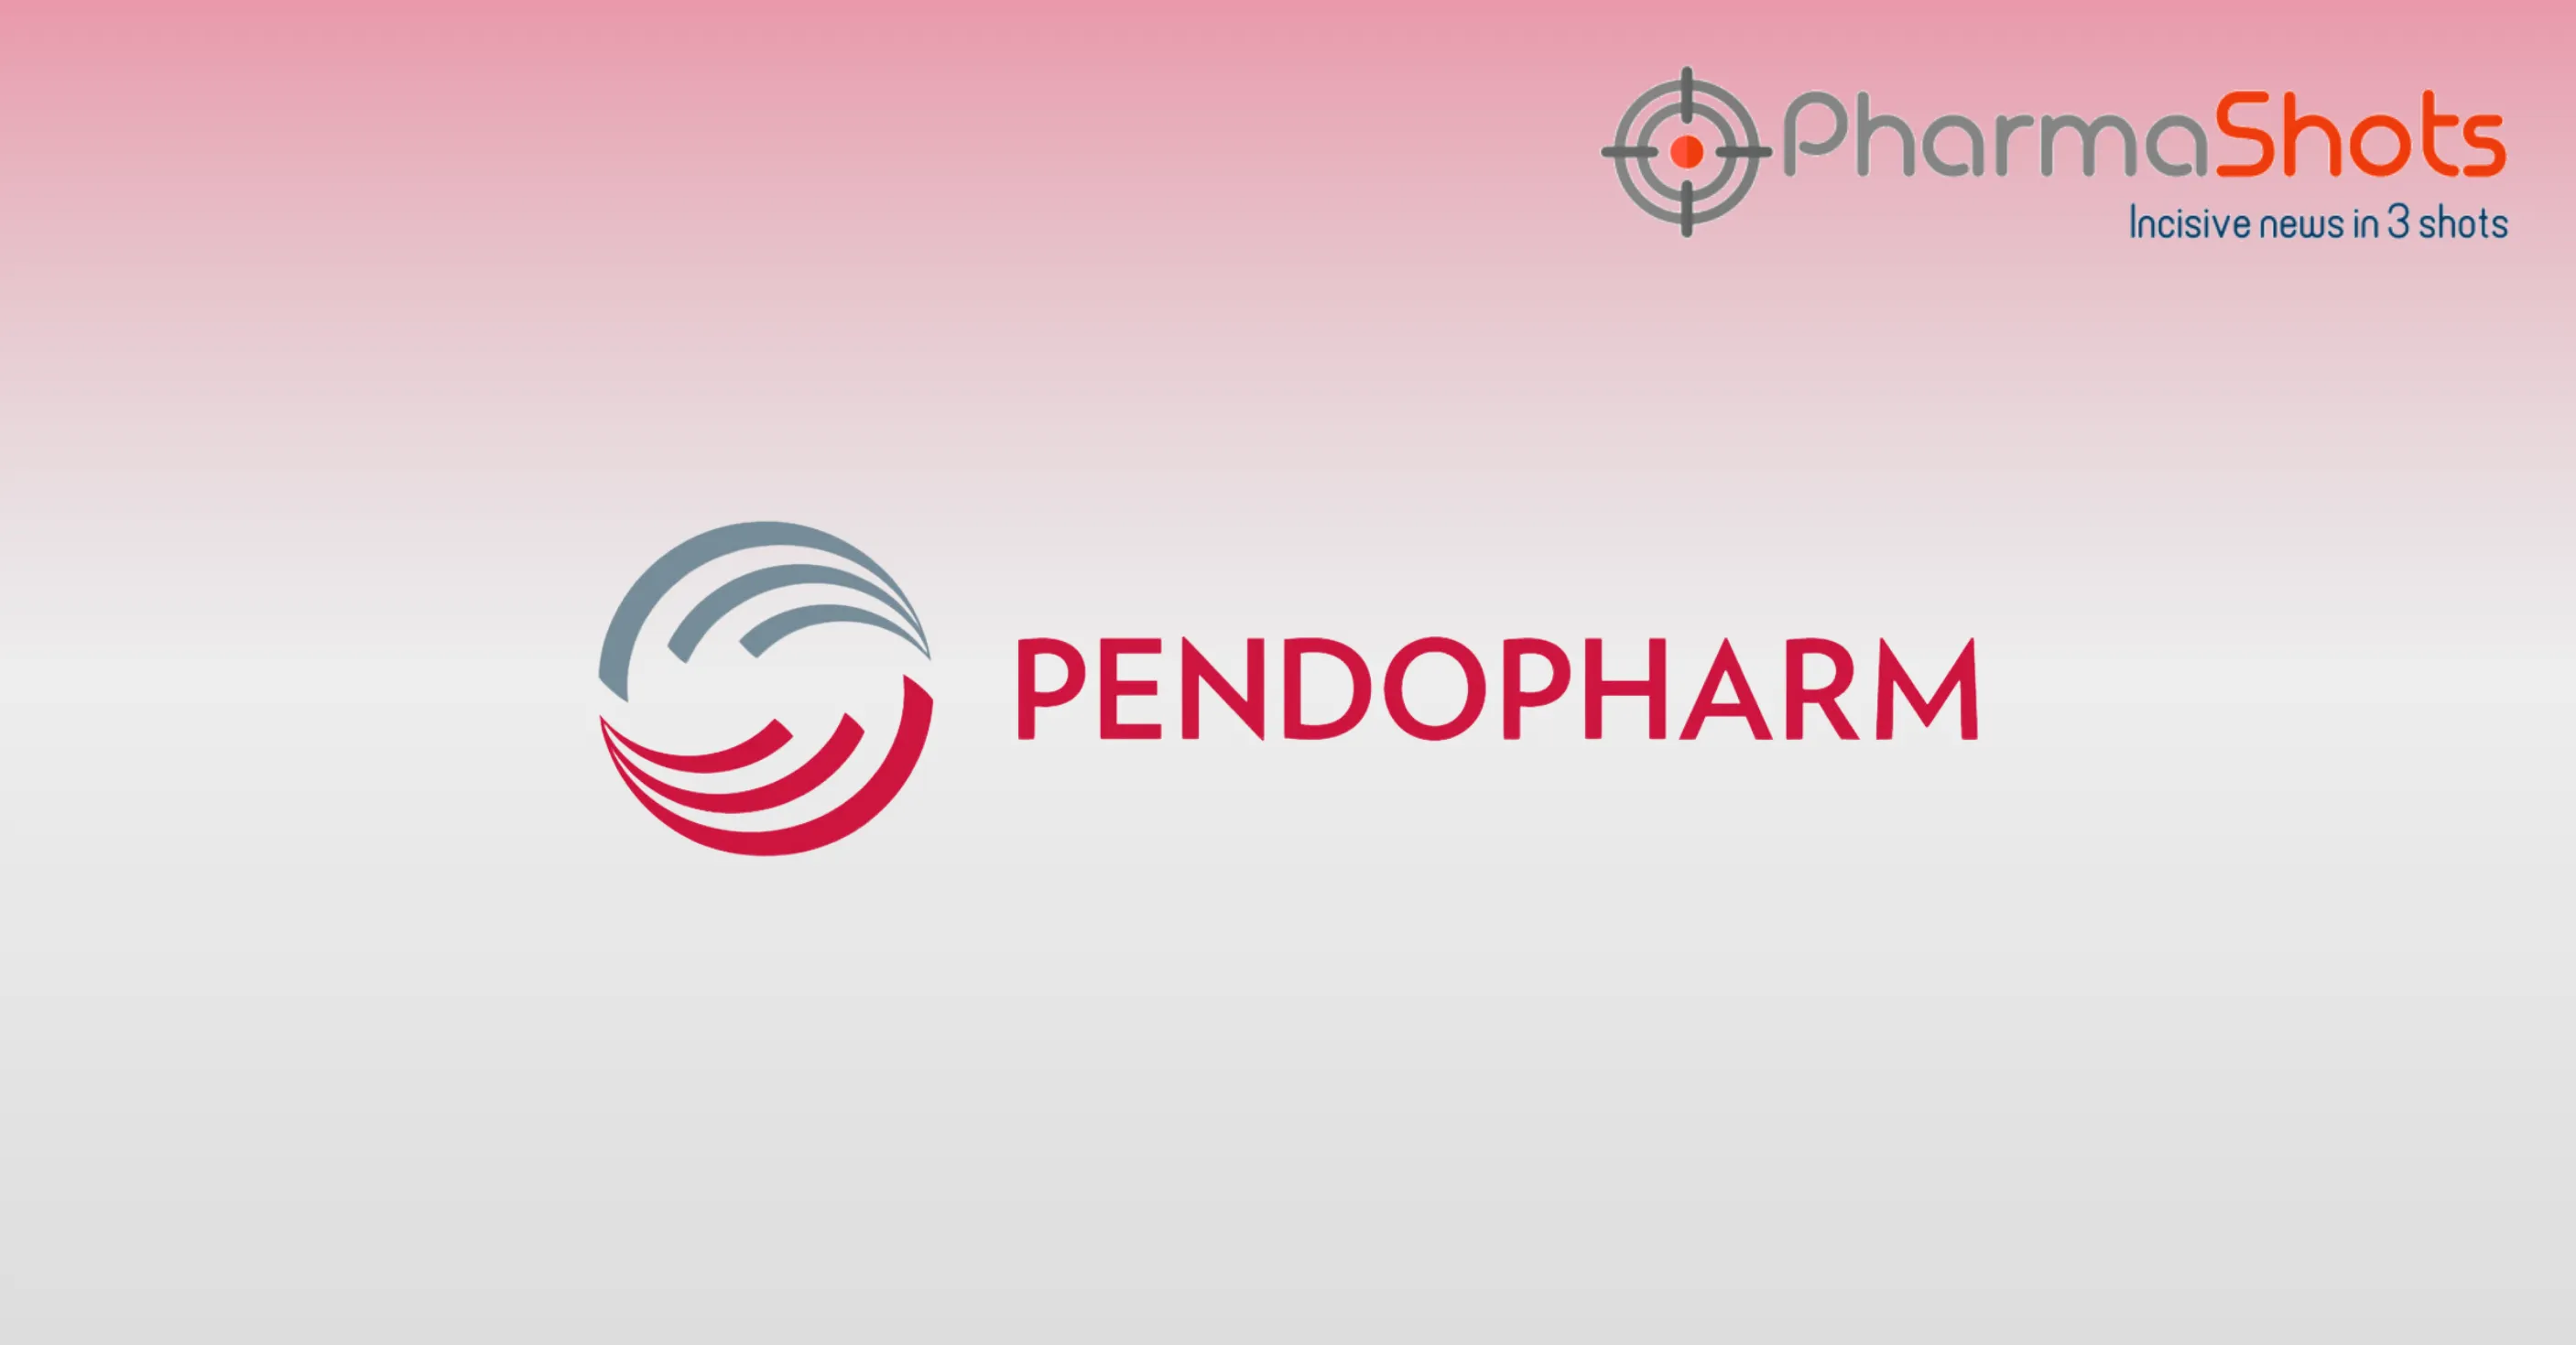 Pendopharm Collaborates with Ascendis Pharma to Commercialize TransCon PTH for Treating Hypoparathyroidism in Canada